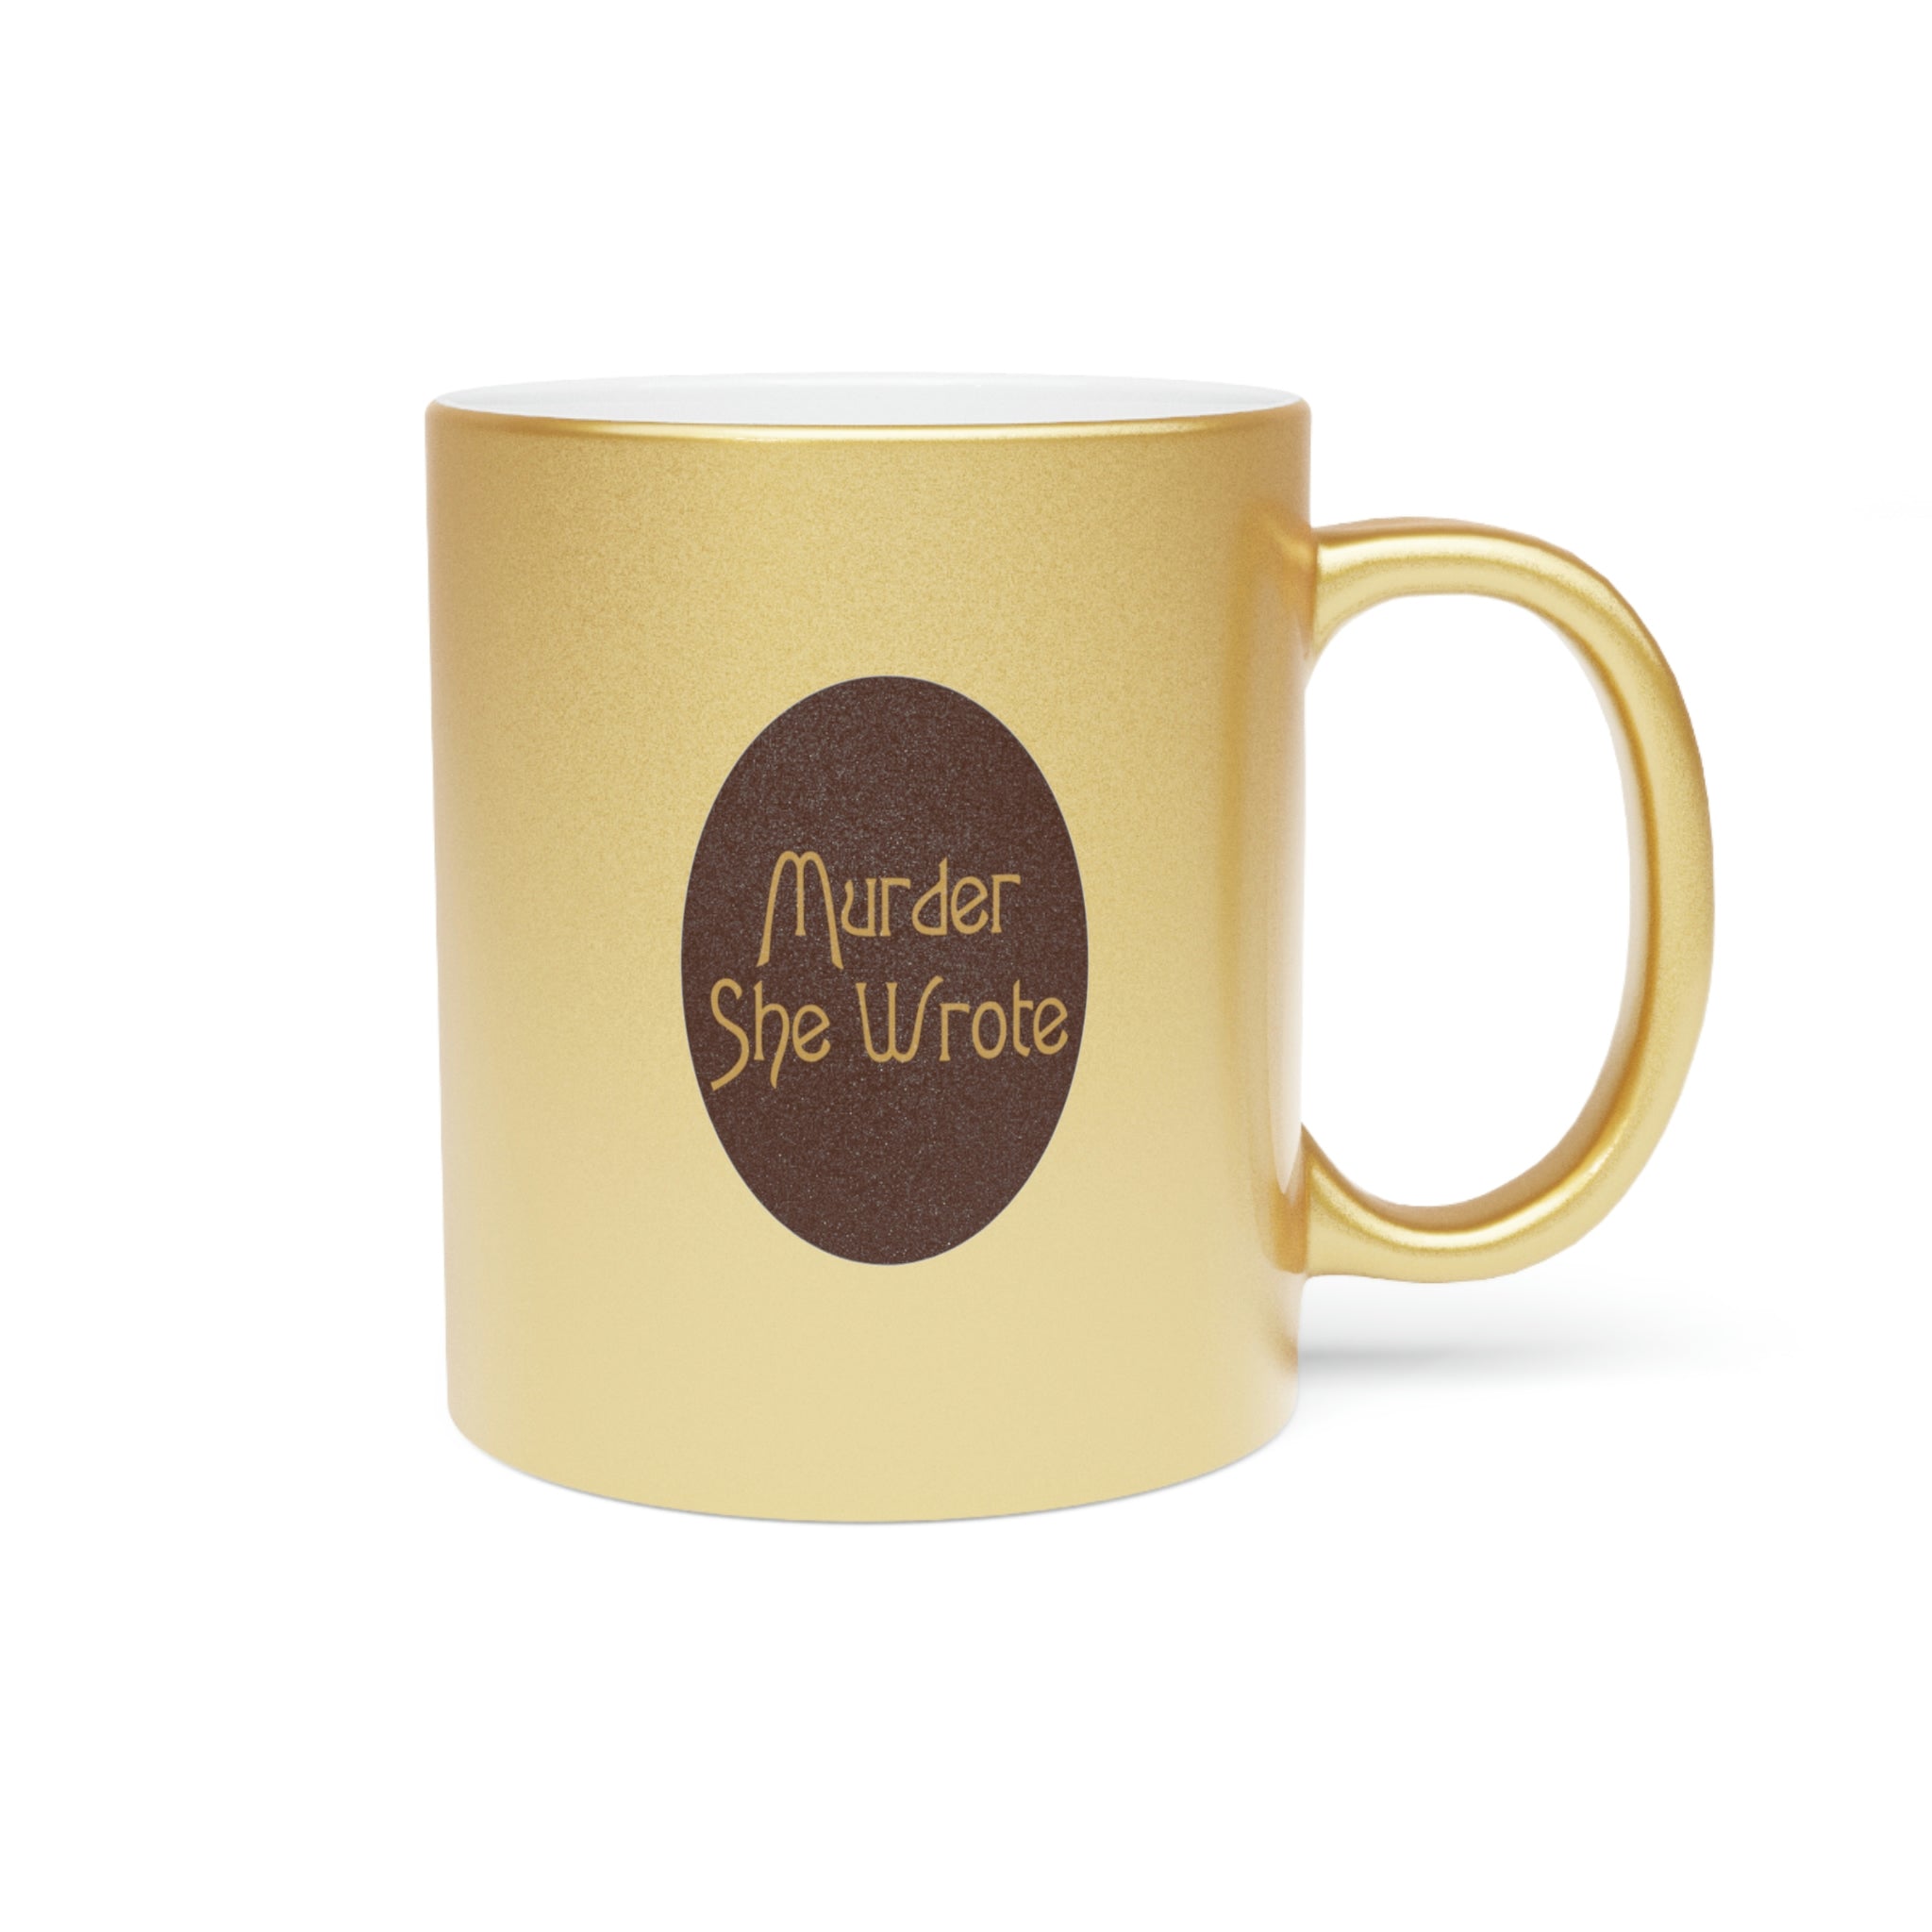 Murder She Wrote Coffee Mug in Metallic Gold 11 oz  back side view same as front view